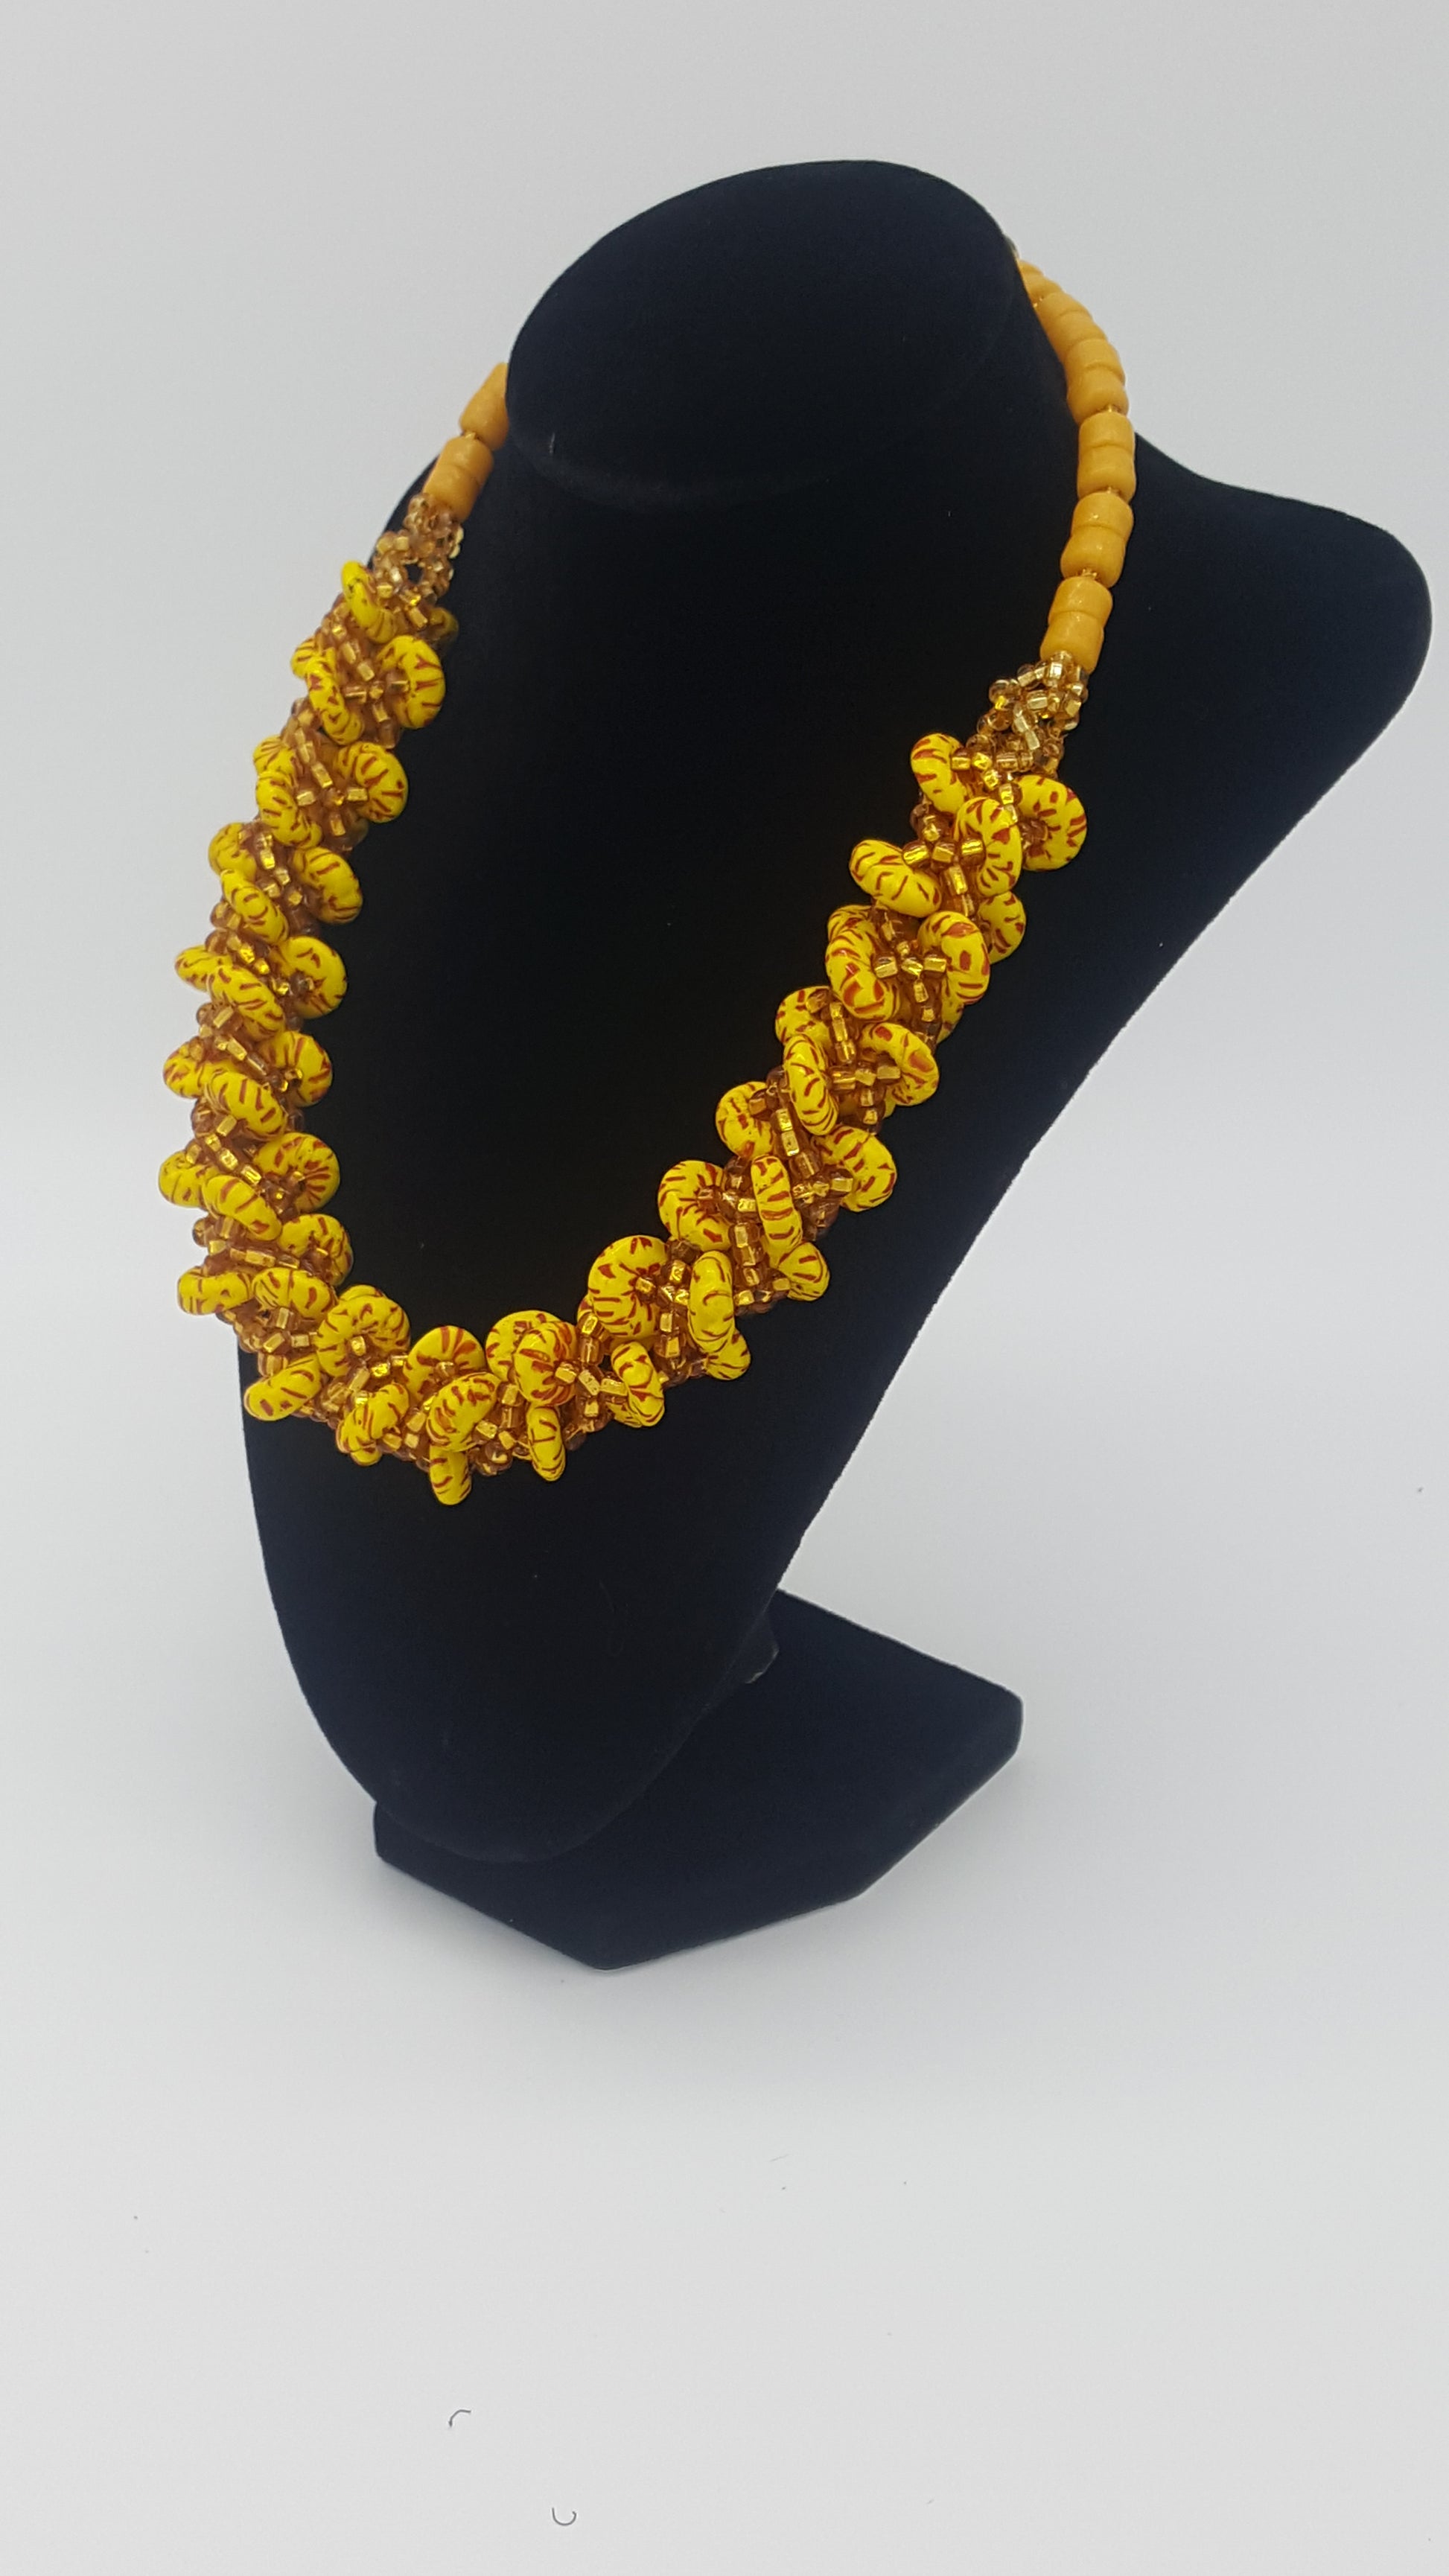 Traditional Ghana yellow glass beaded necklace